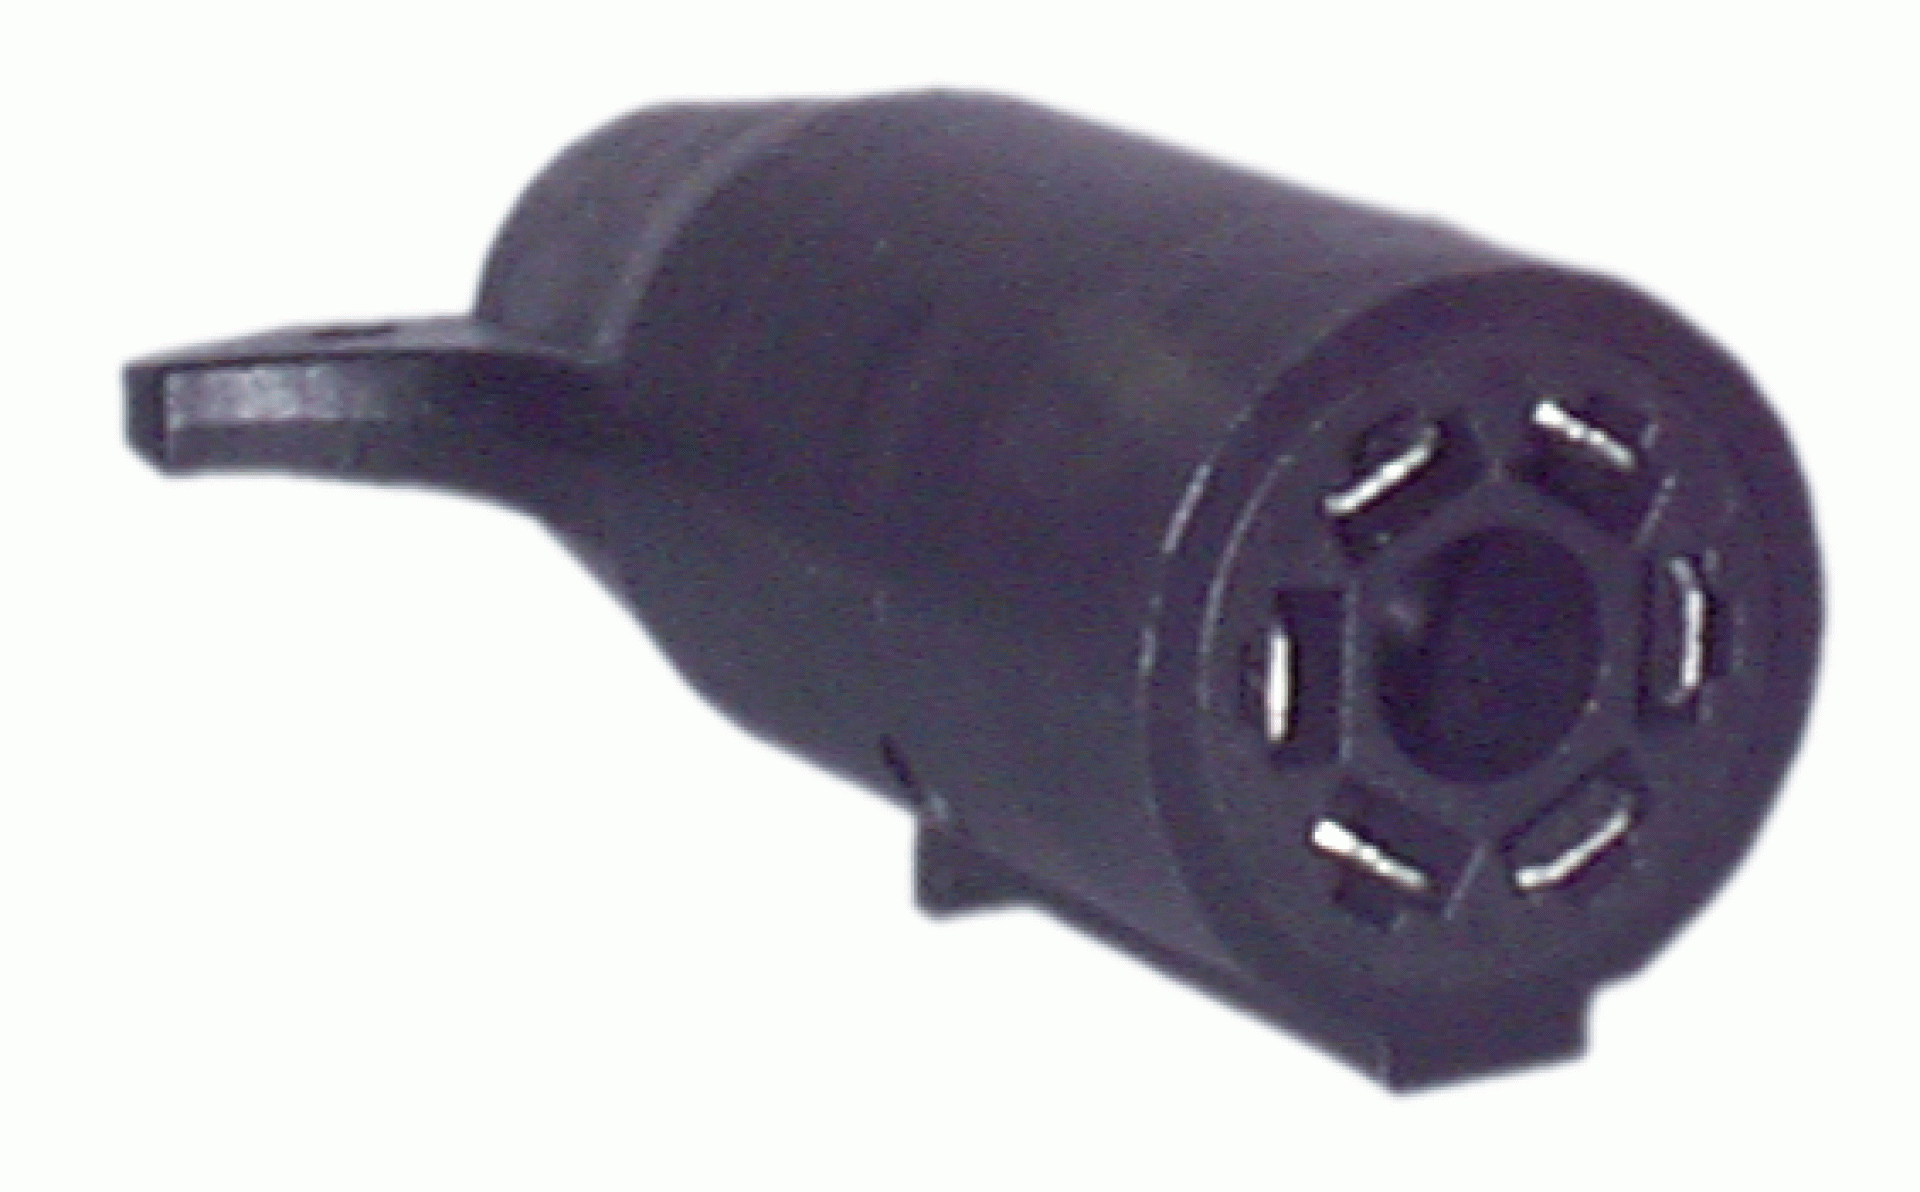 HOPKINS MFG CORP | 47555 | CONNECTOR ADAPTER 7 BLADE TO 6 ROUND ONE PIECE MOLDED